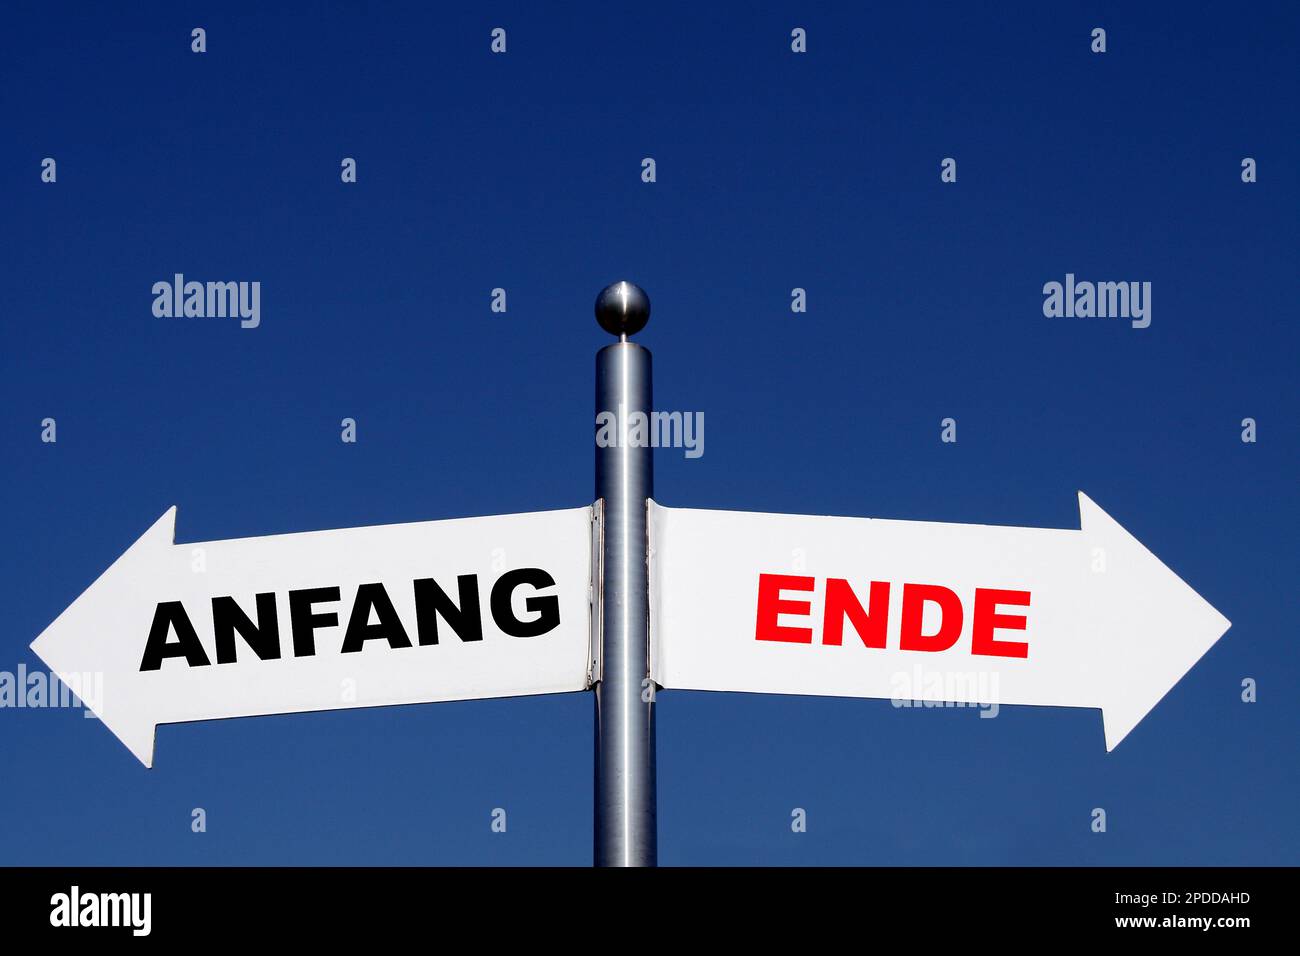 signposts pointing in different directions, options Anfang - Ende, beginning - ending Stock Photo